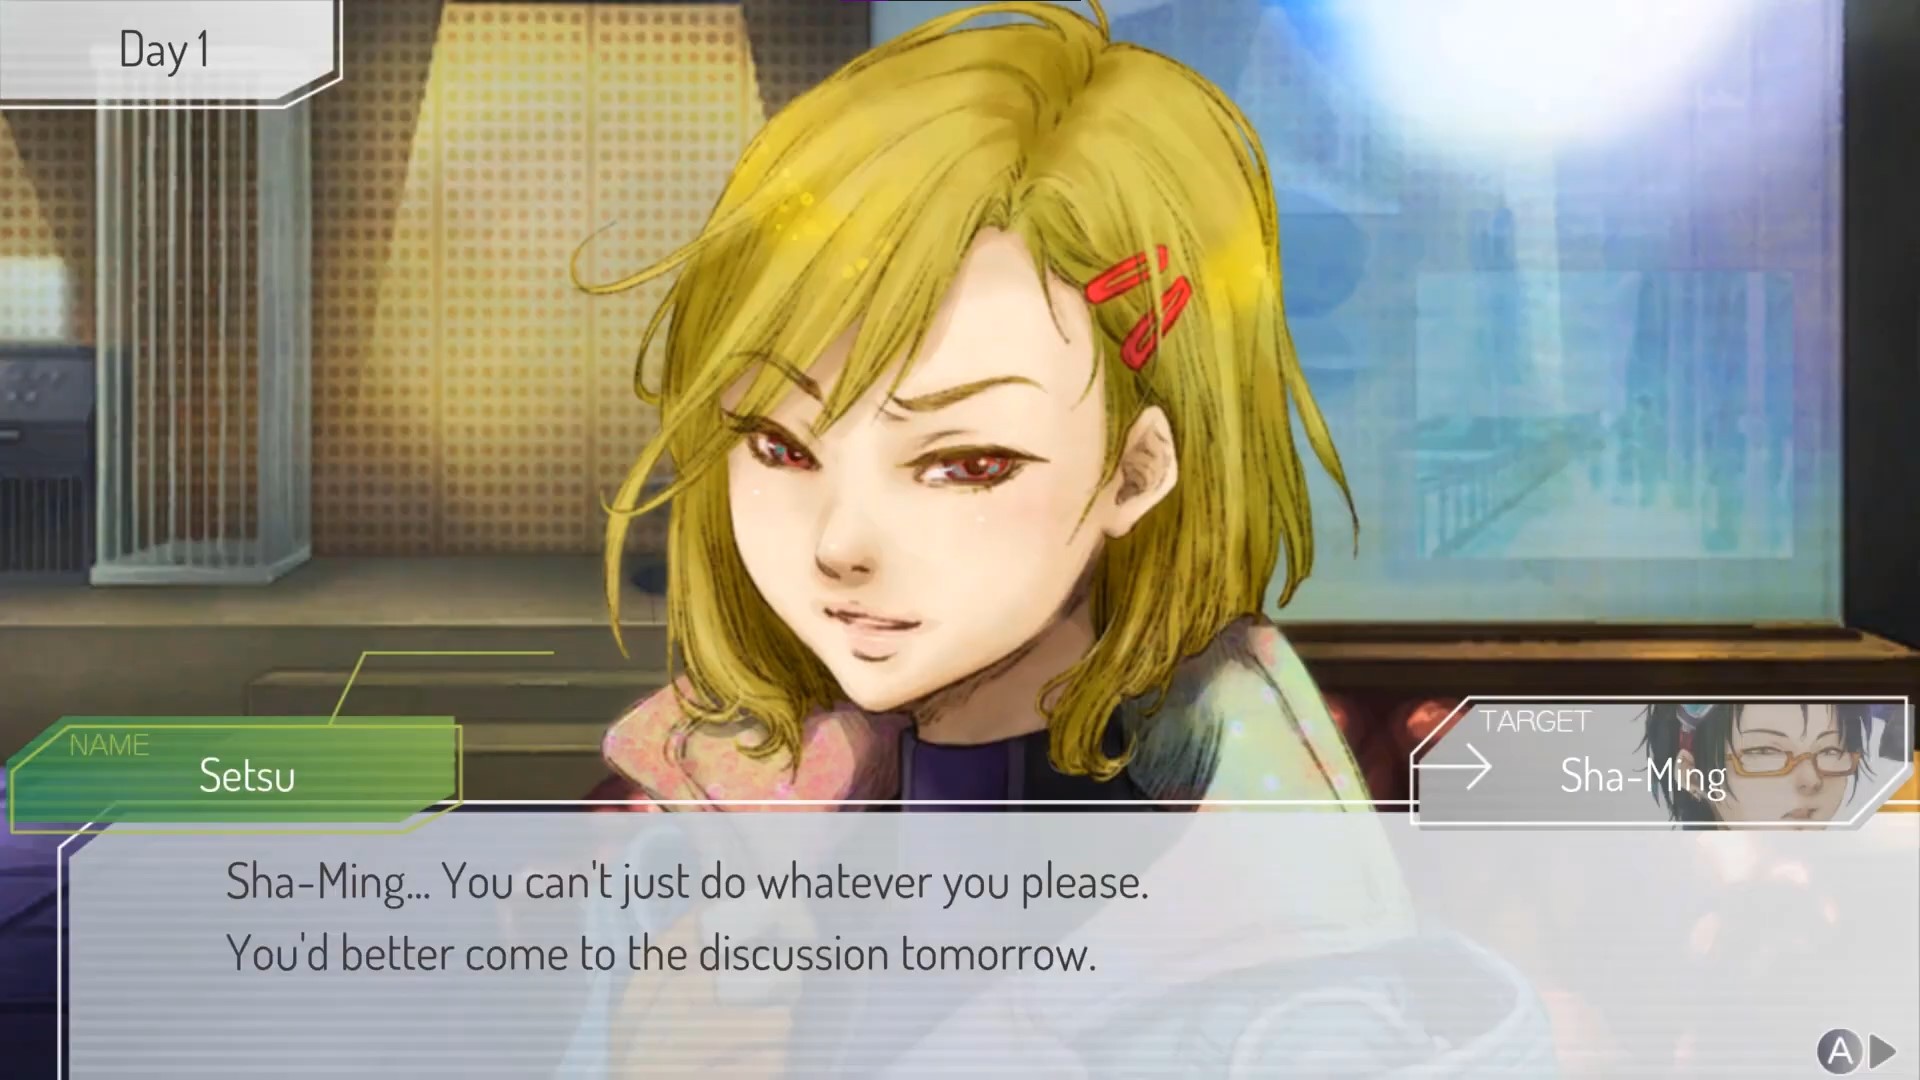 Screenshot of Setsu saying "Sha-Ming, you can't just do whatever you please. You'd better come to the discussion tomorrow